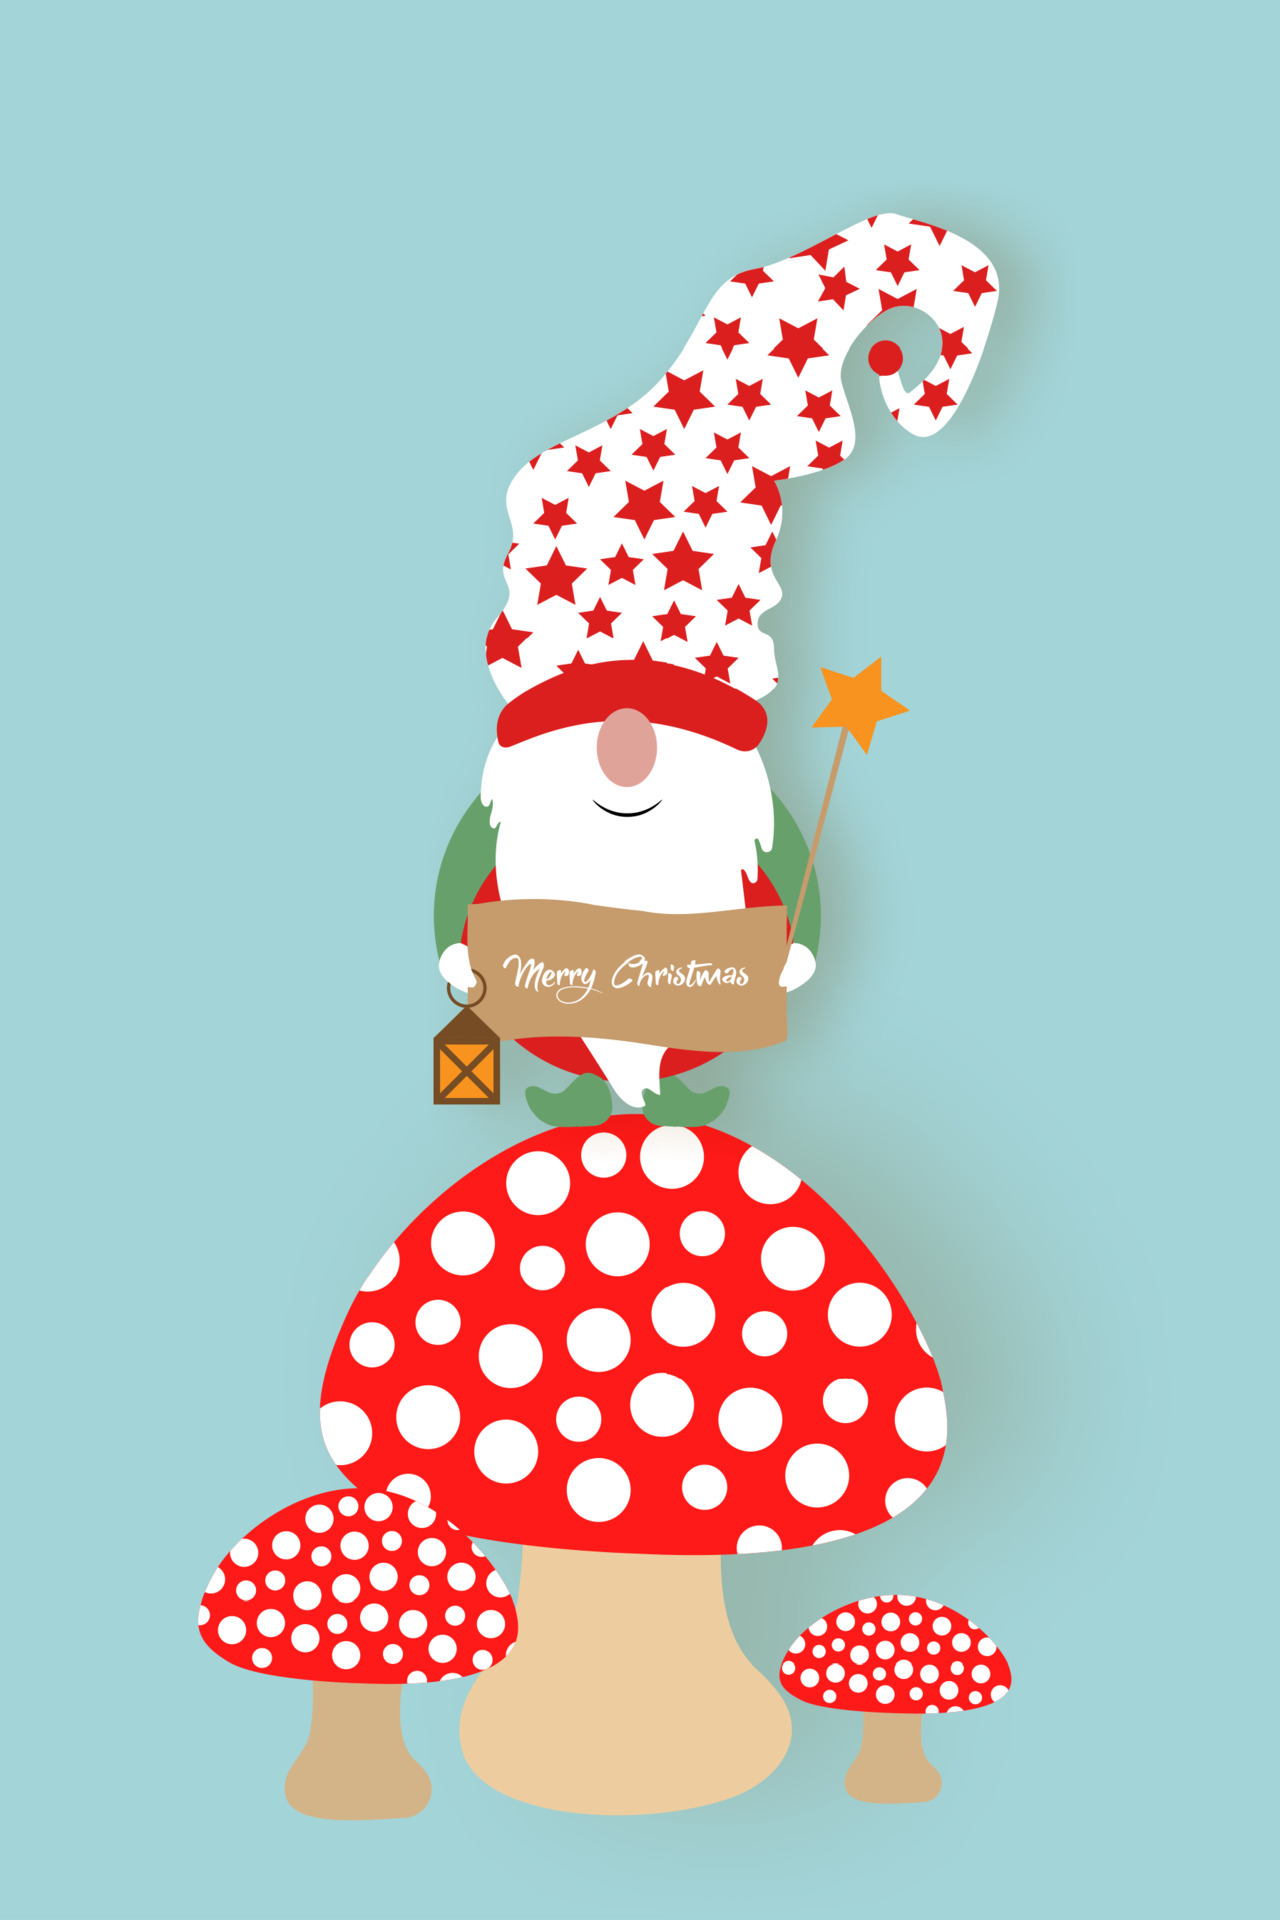 Christmas Gnome above a red mushroom. Merry Christmas Cute Scandinavian Nordic Santa Claus Elf, vector isolated on blue background. Xmas elements for design, invitations, cards, childrens toys